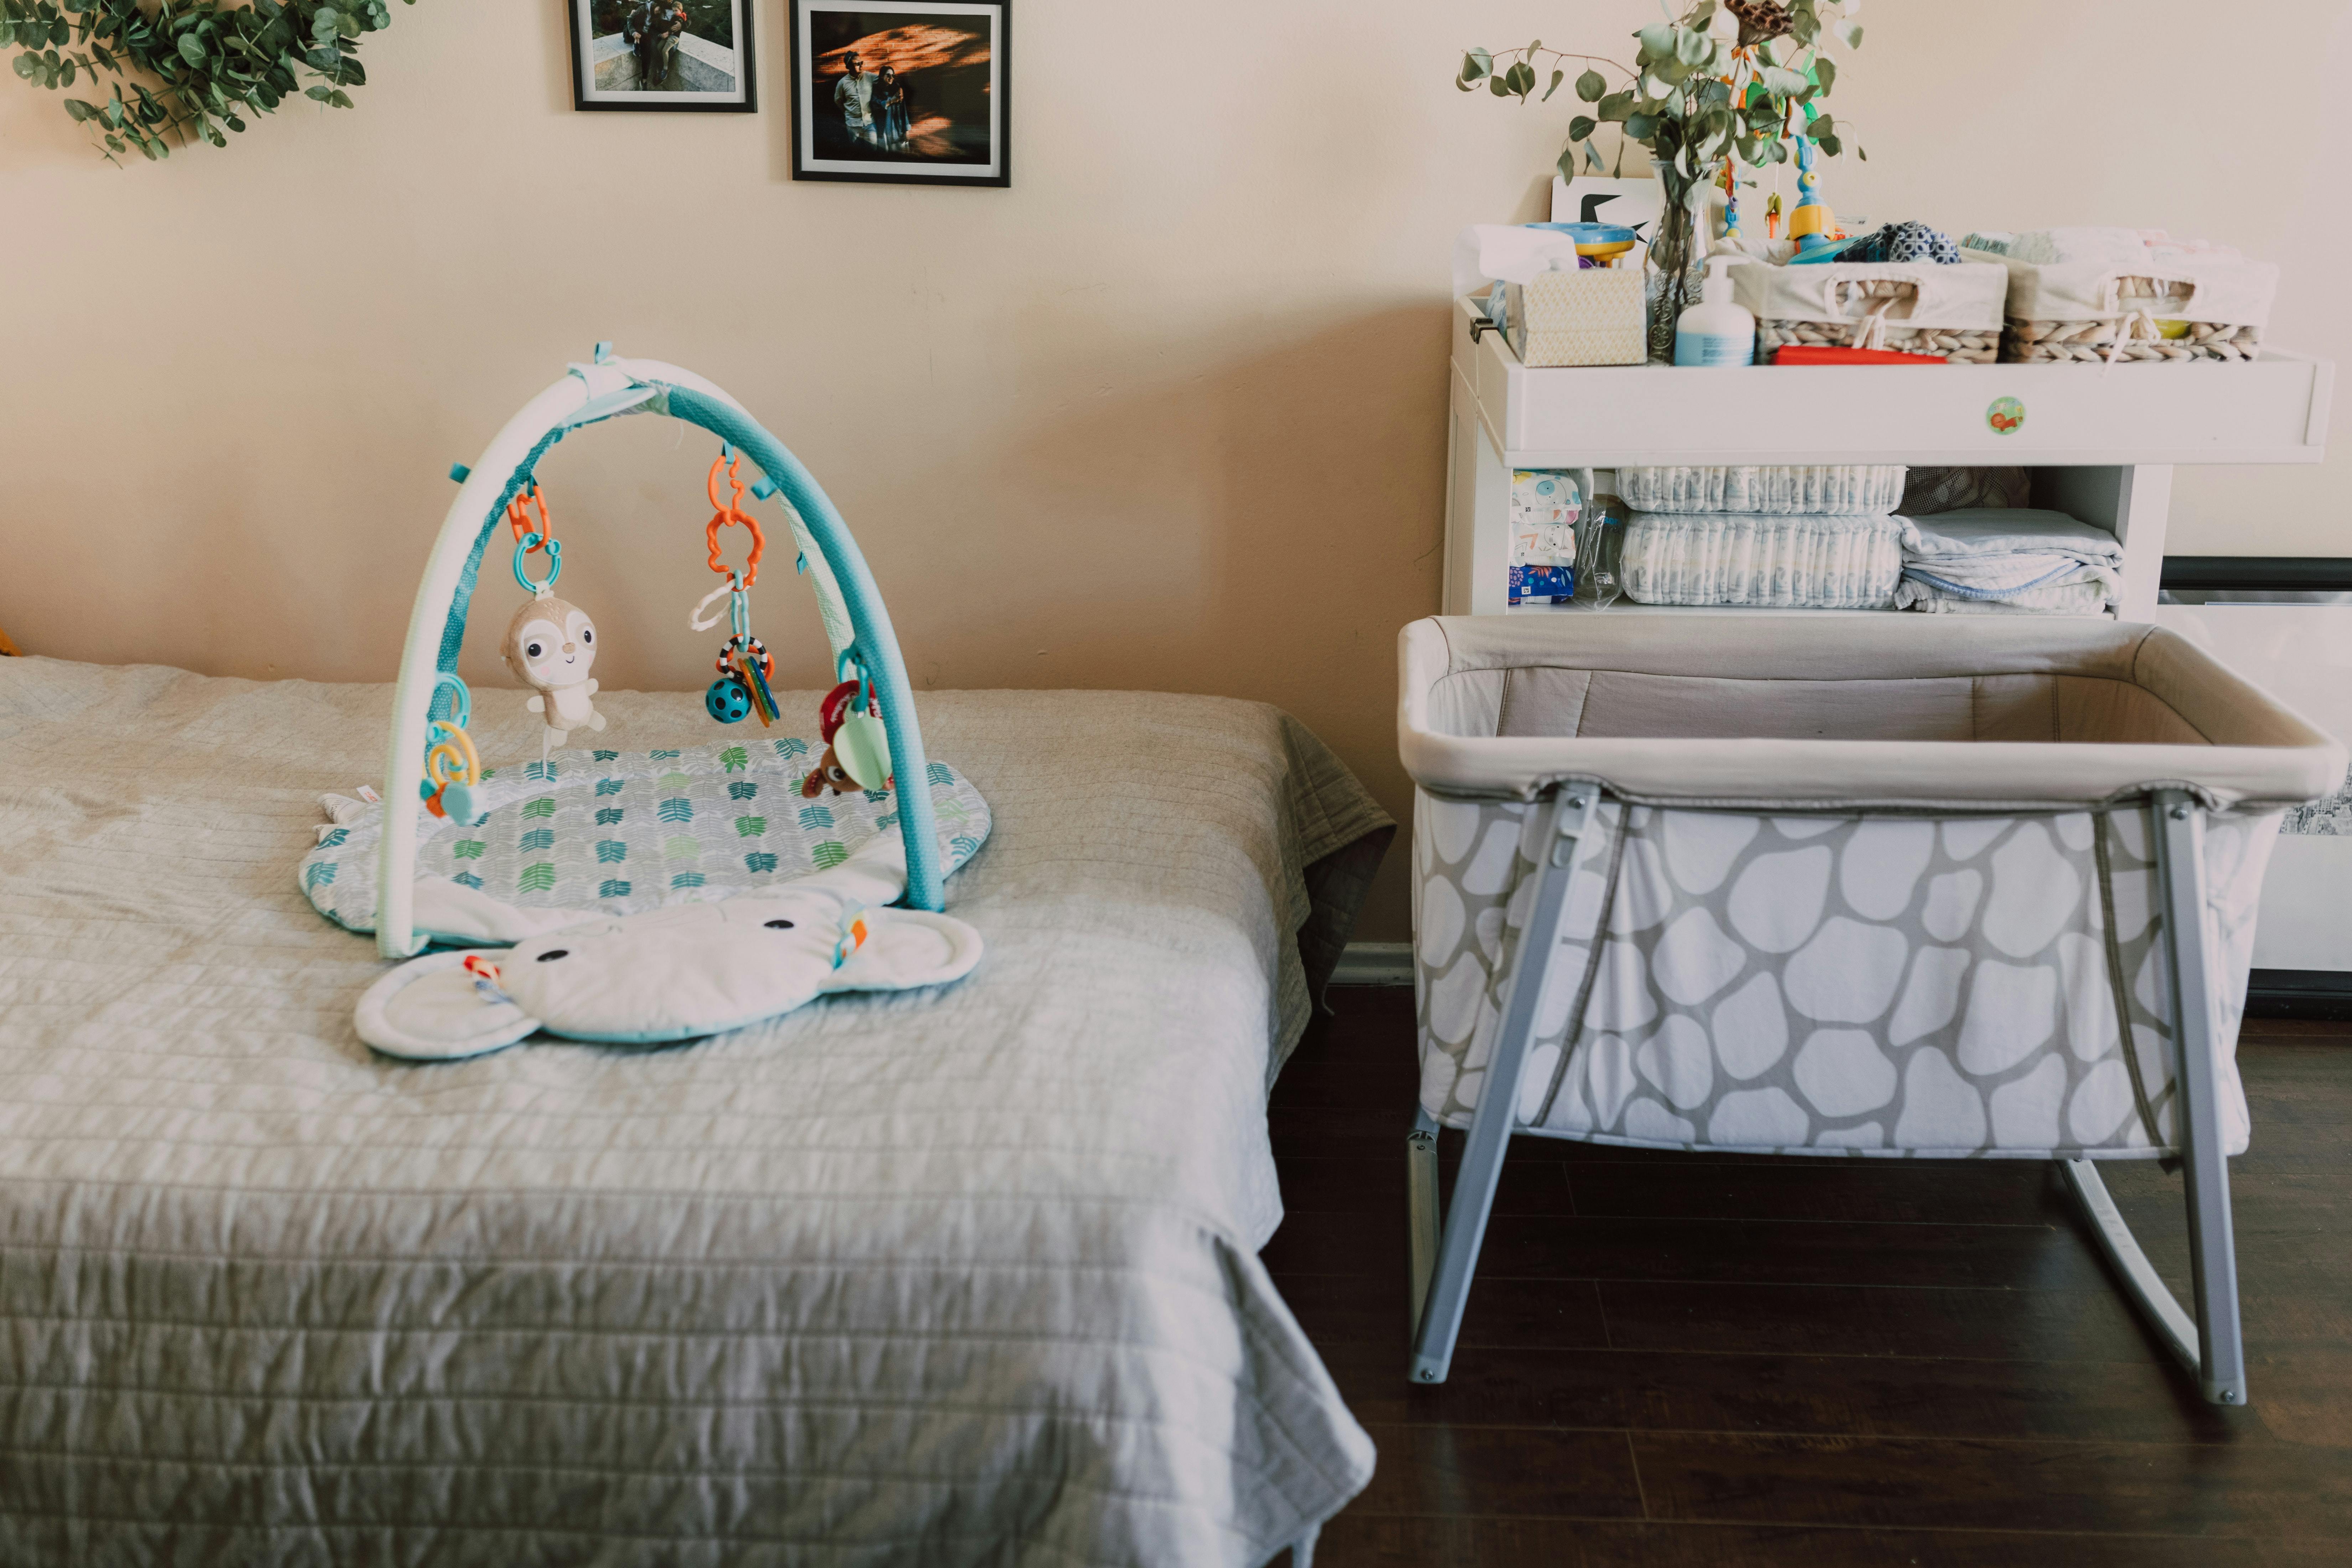 A travel crib is setup next to a bed. On the bed is an activity center for a baby. 